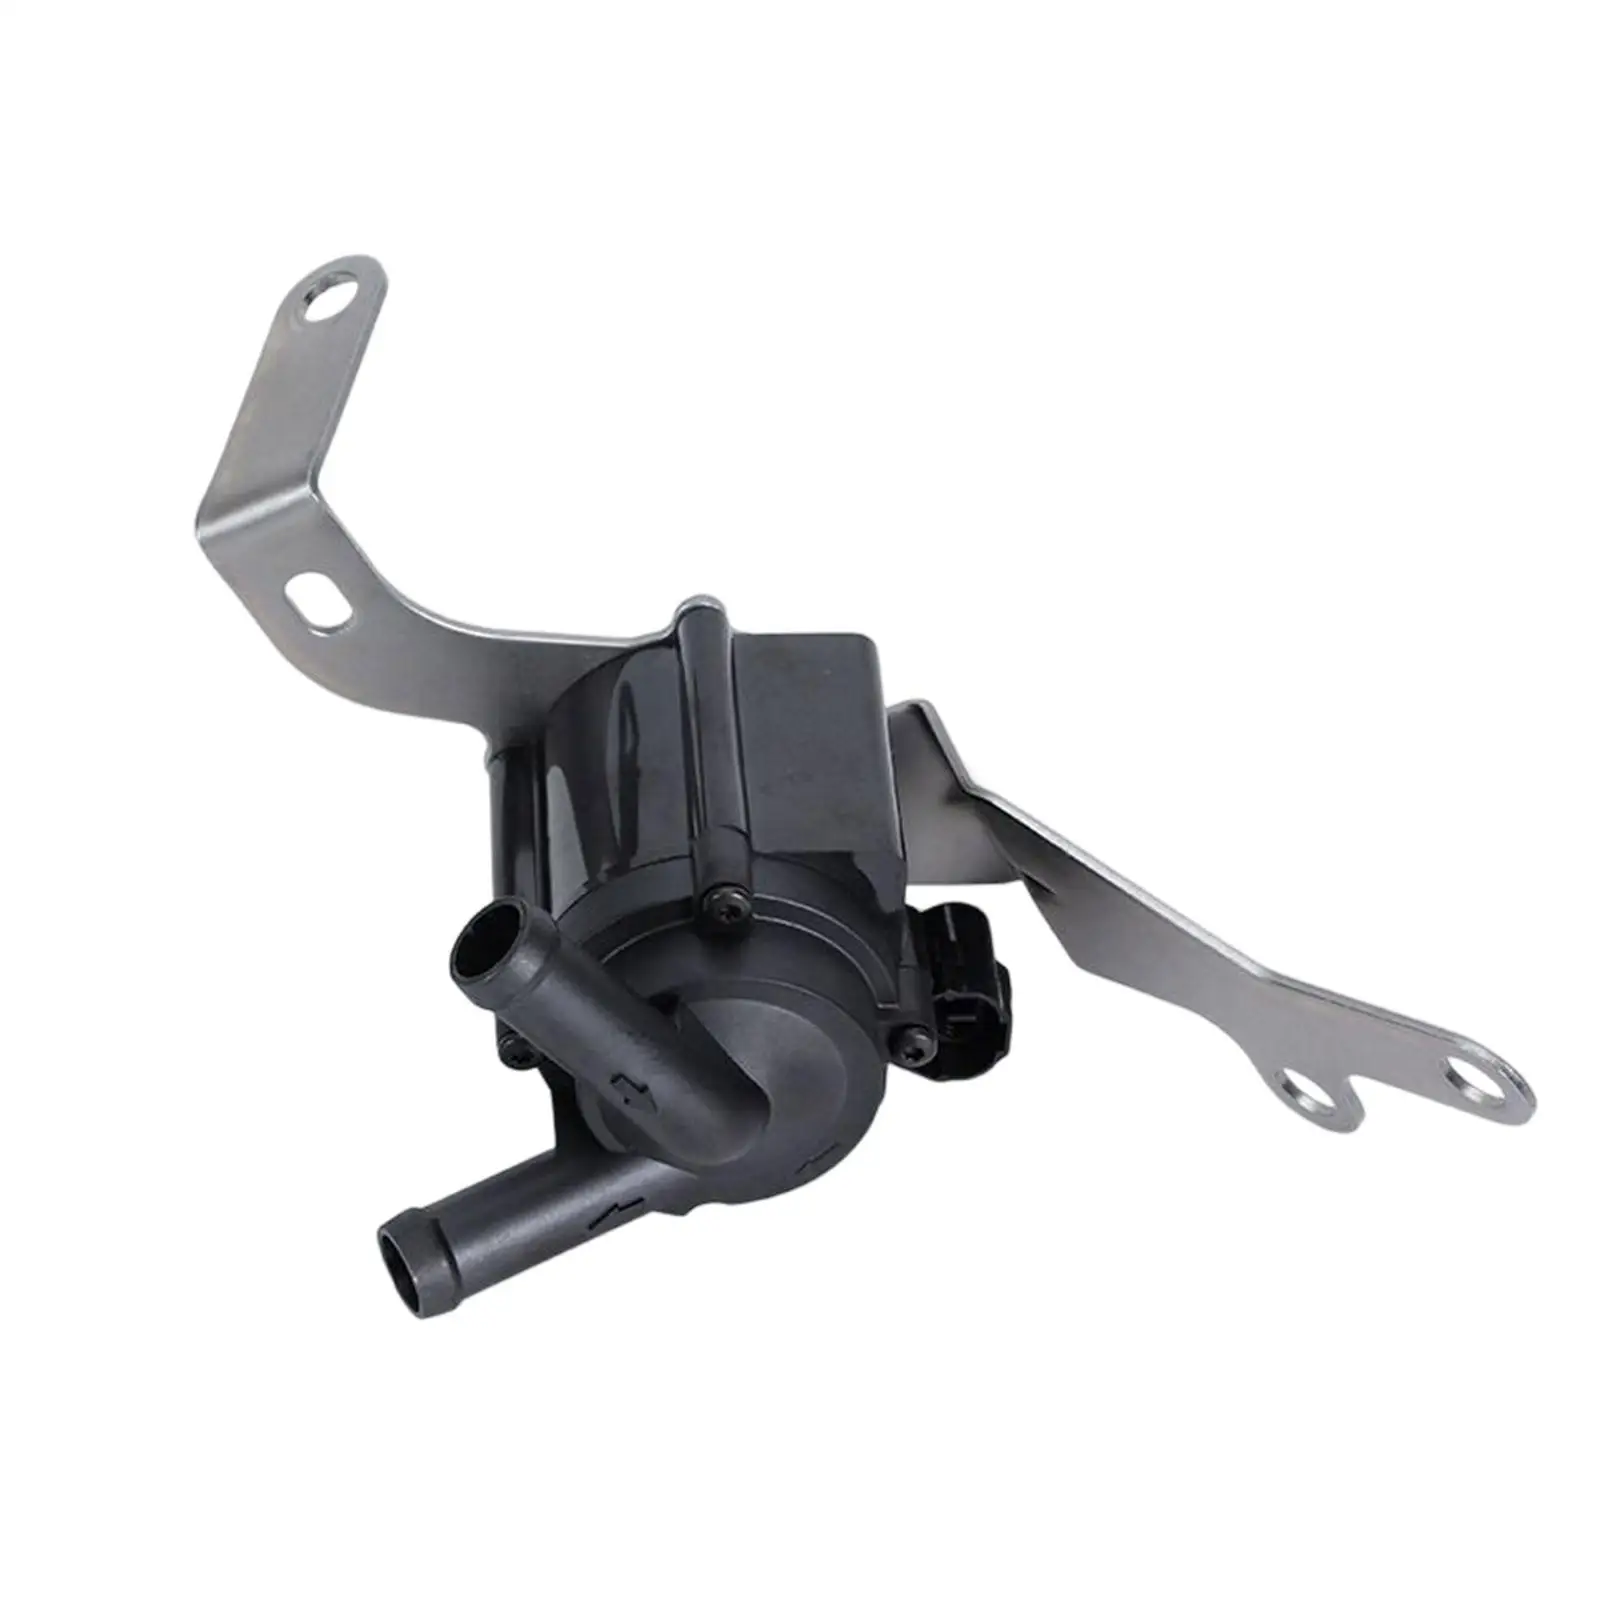 Auto Electronic Water Pump Parts Replacement Easy to Install Stable Performance Premium High Efficiency for Haval Cars